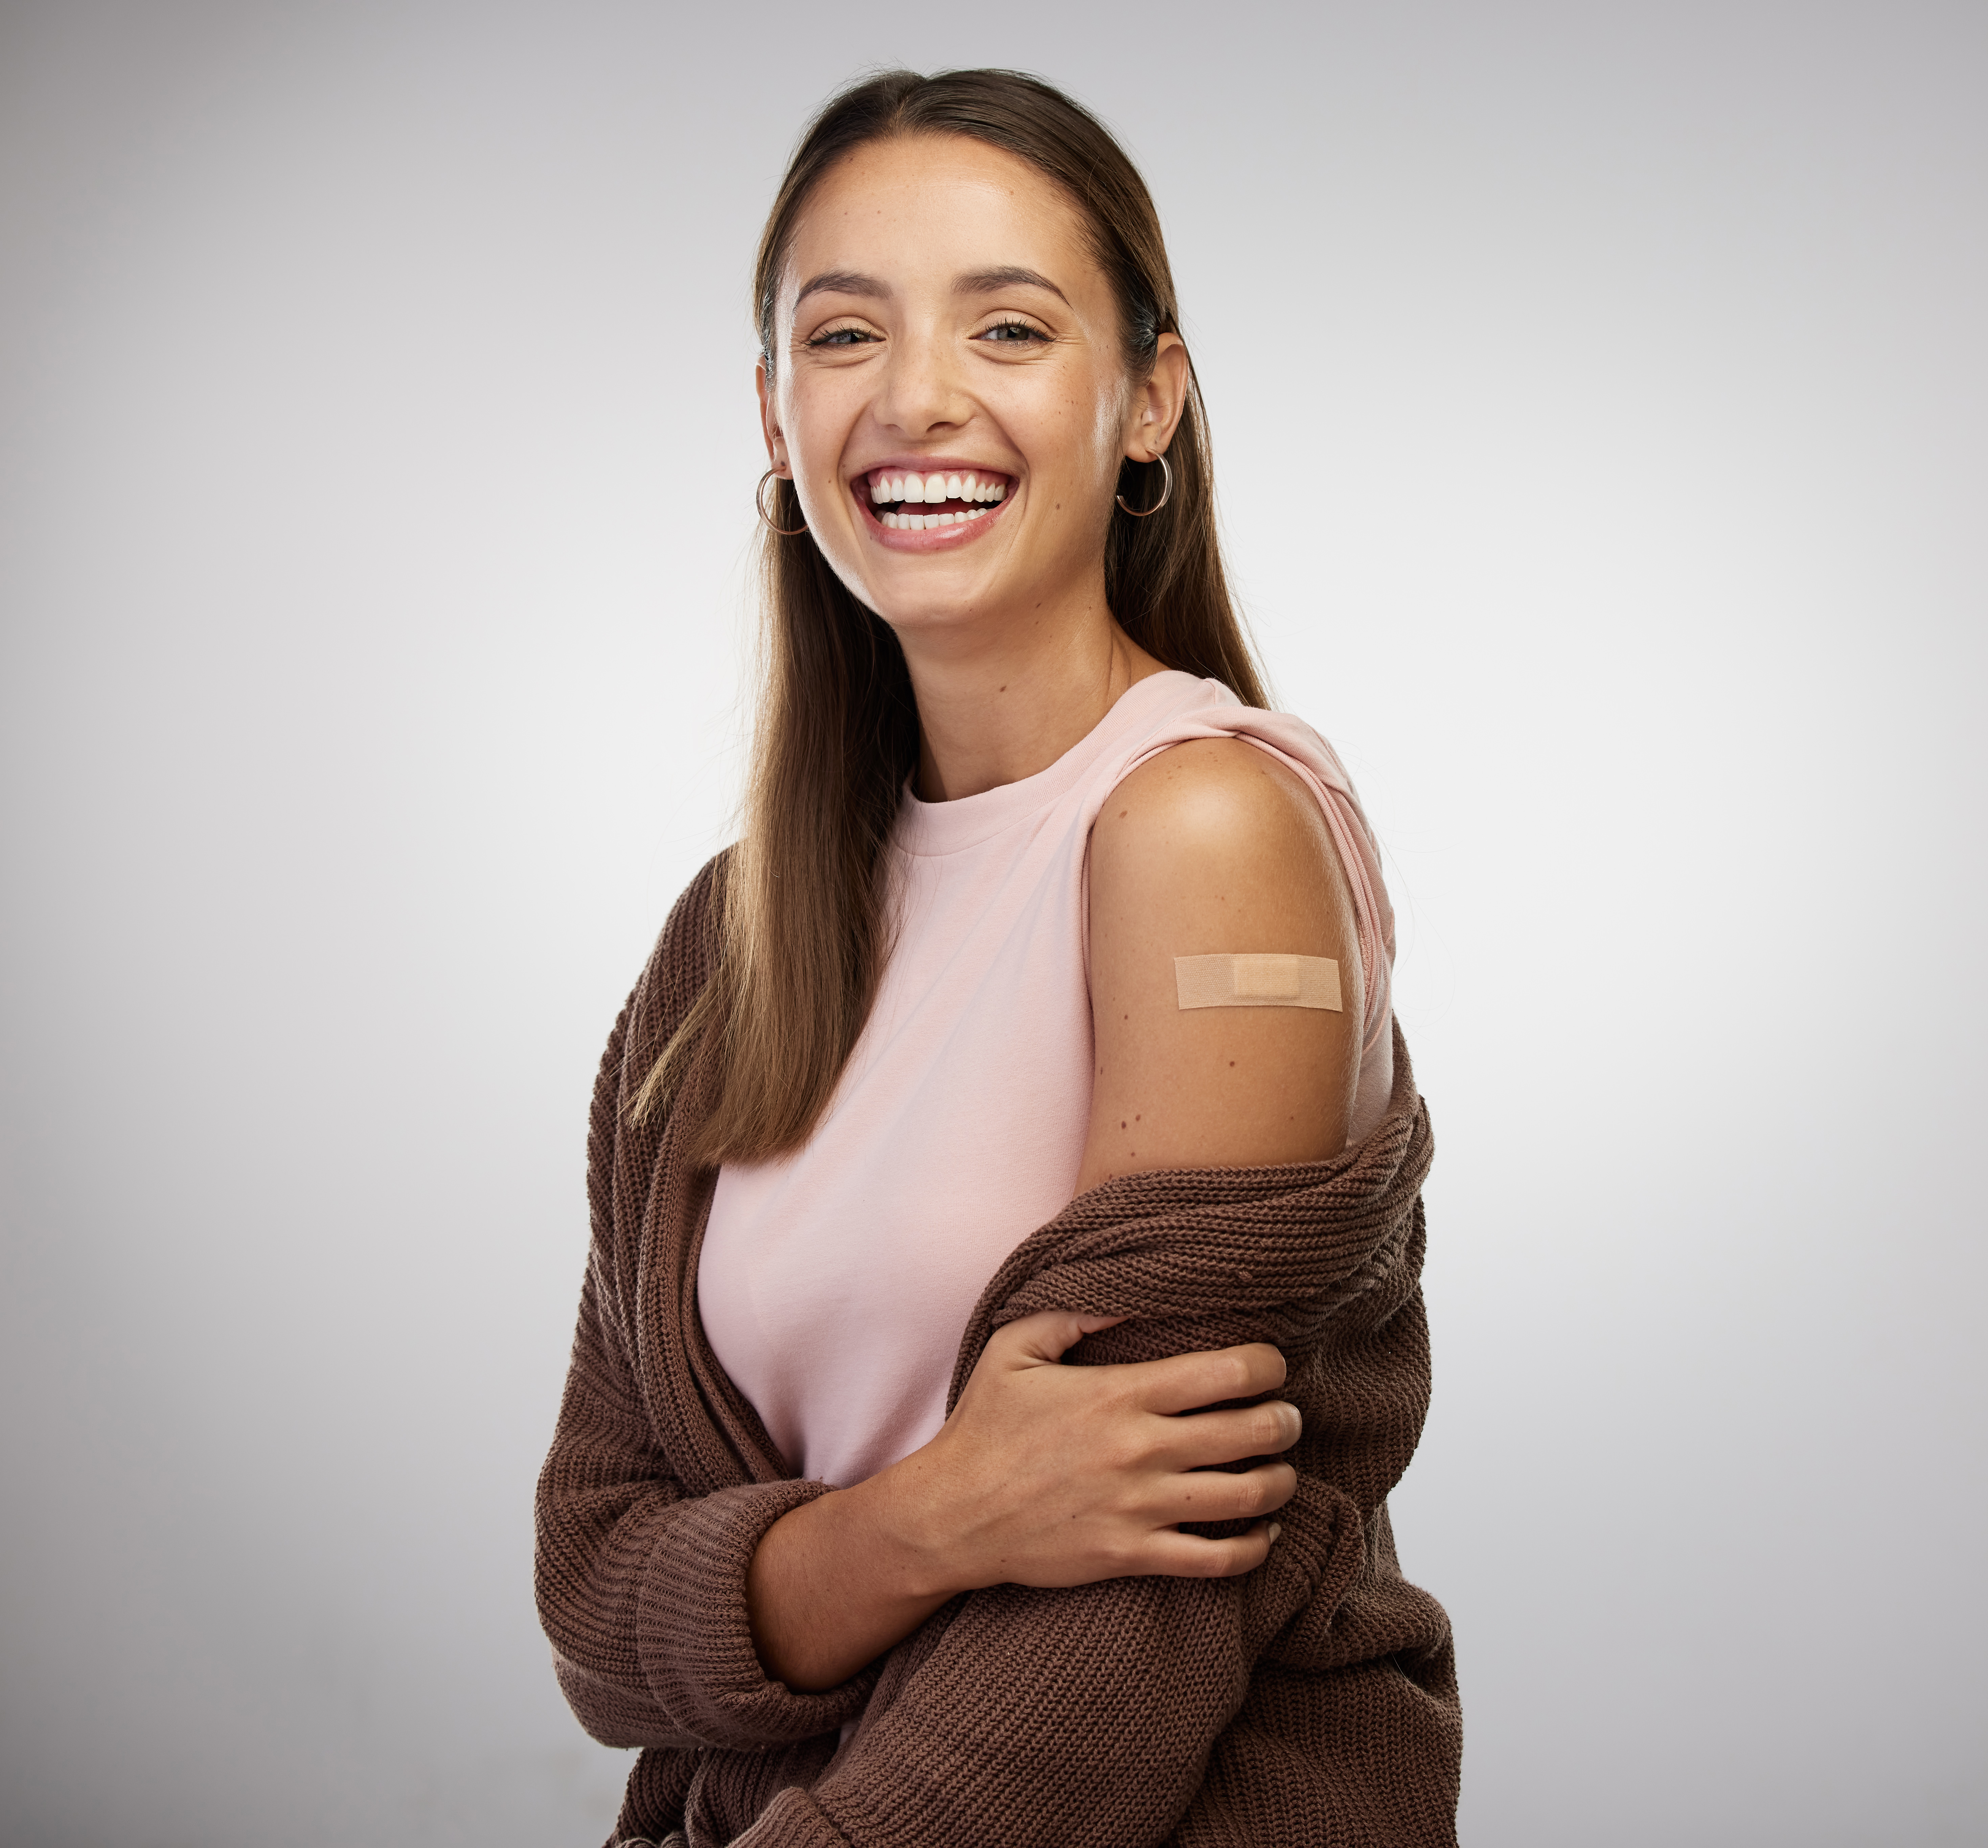 A student shows off their flu shot bandage.